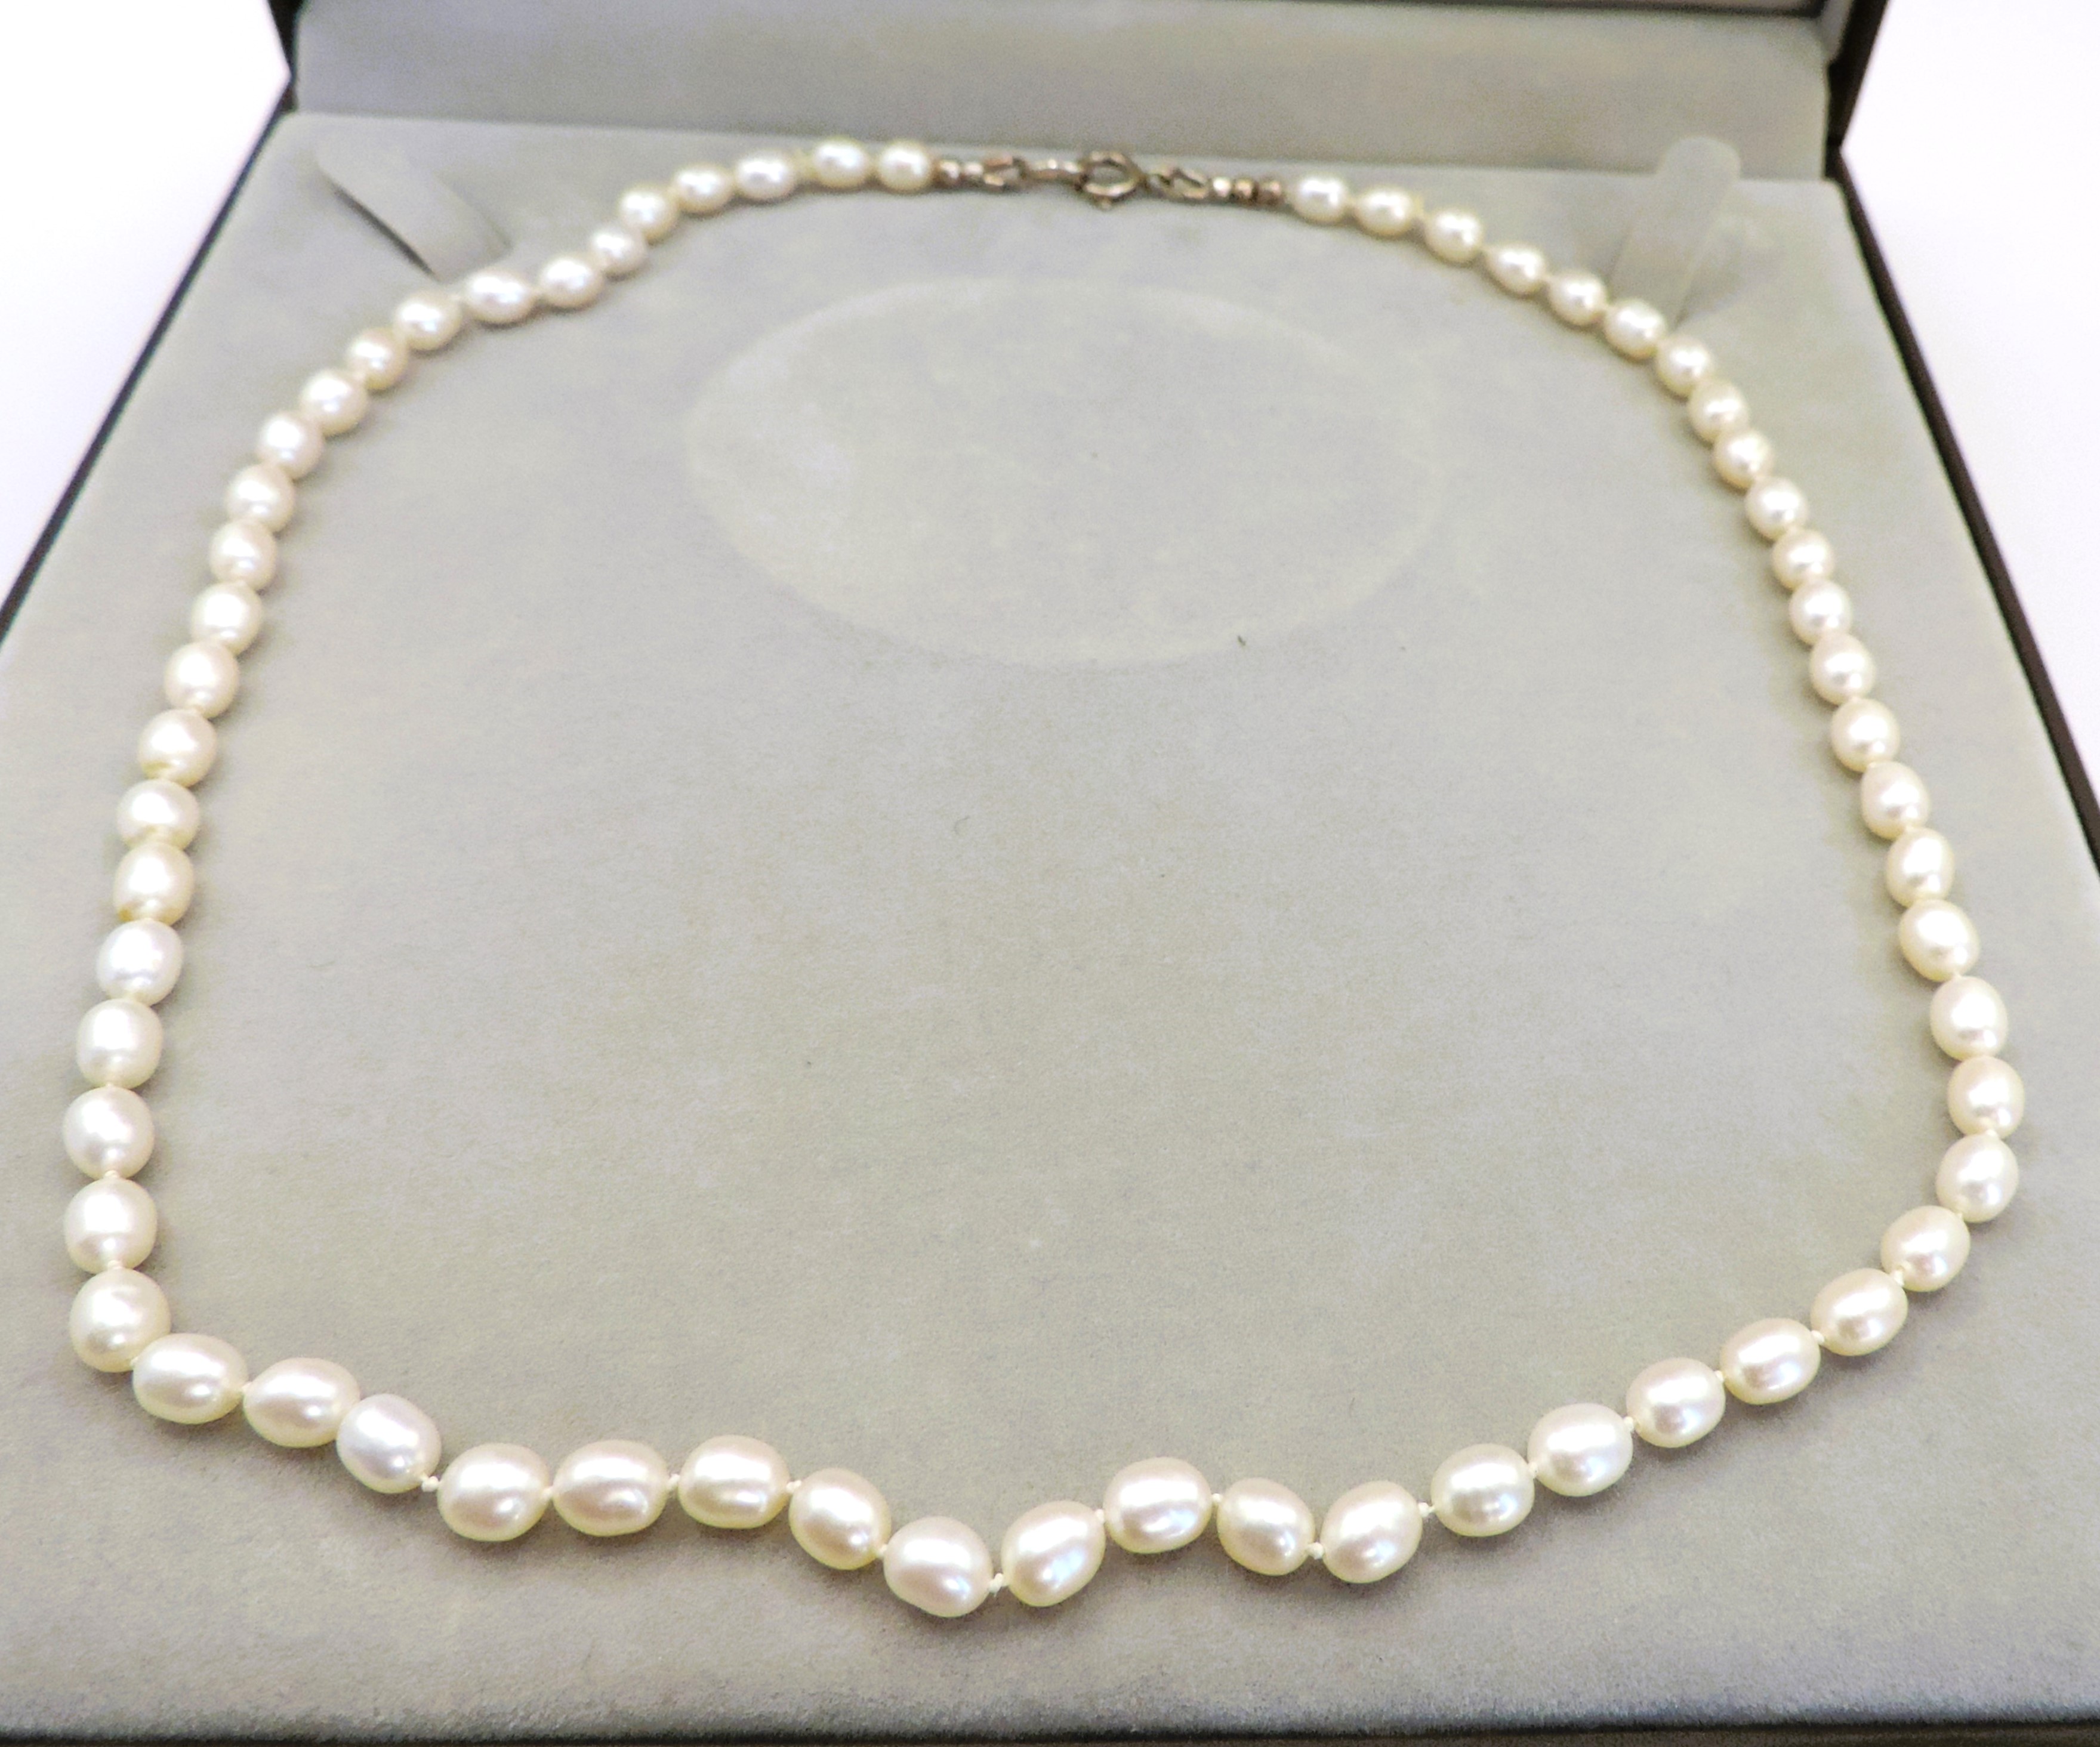 Cultured Pearl Necklace 6mm Oval Pearls Silver Clasp with Gift Pouch - Image 3 of 4